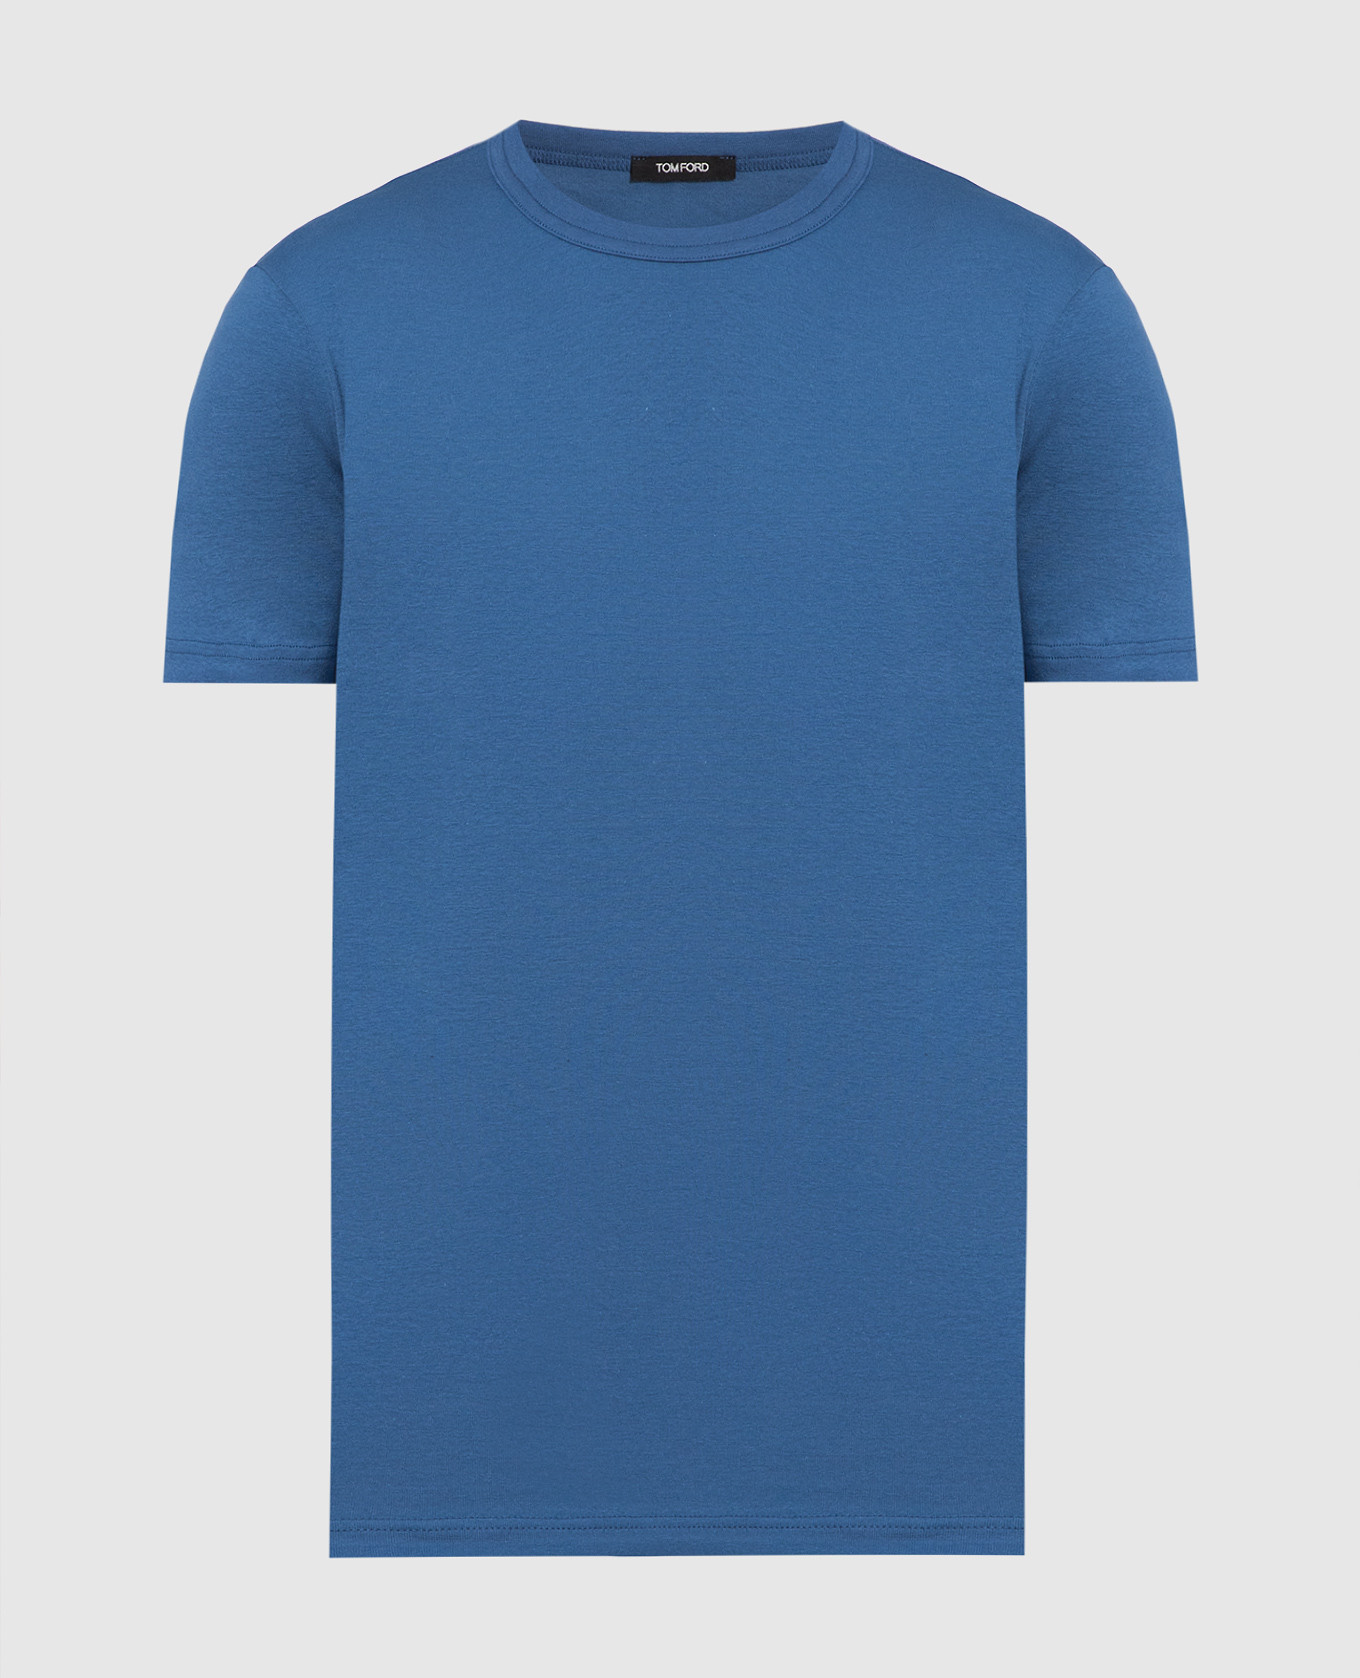 Blue t-shirt with logo